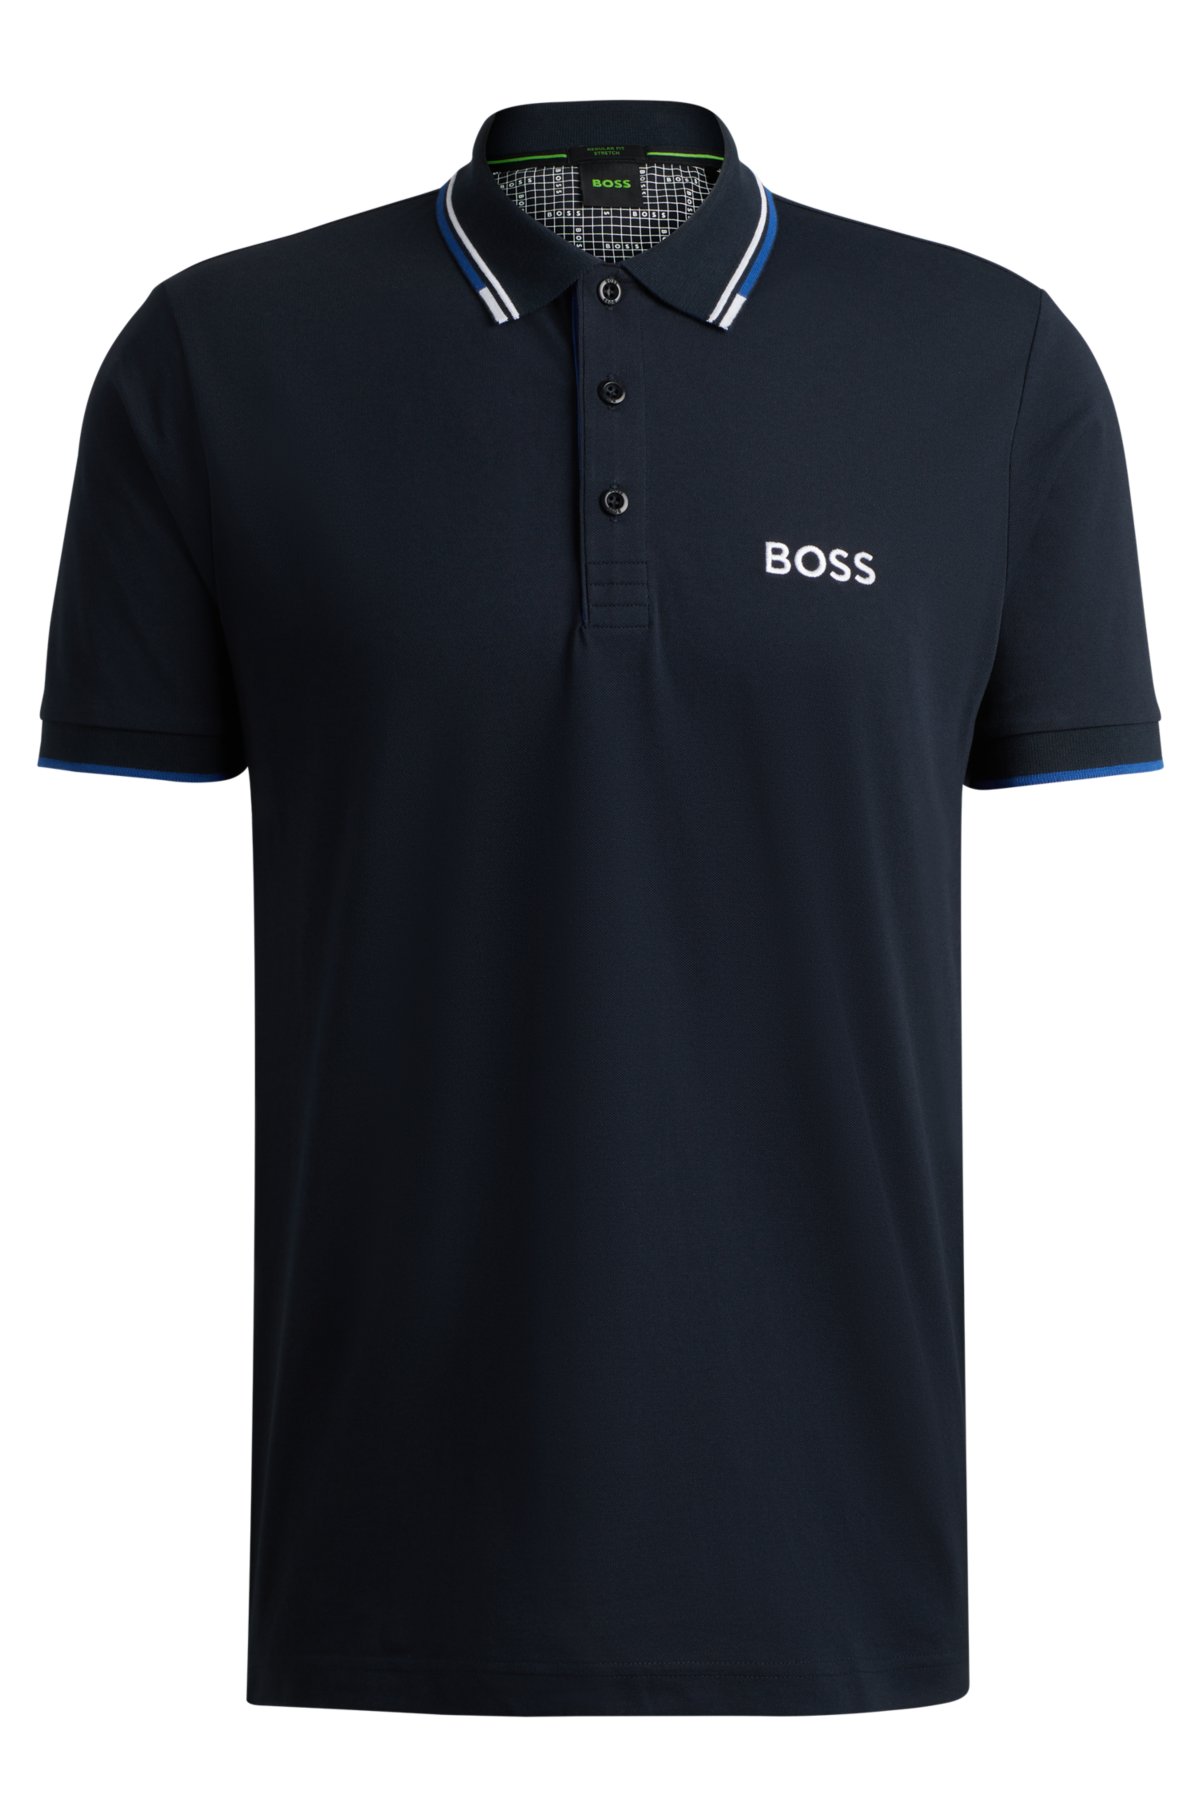 Cotton-blend contrast logos shirt with BOSS - polo